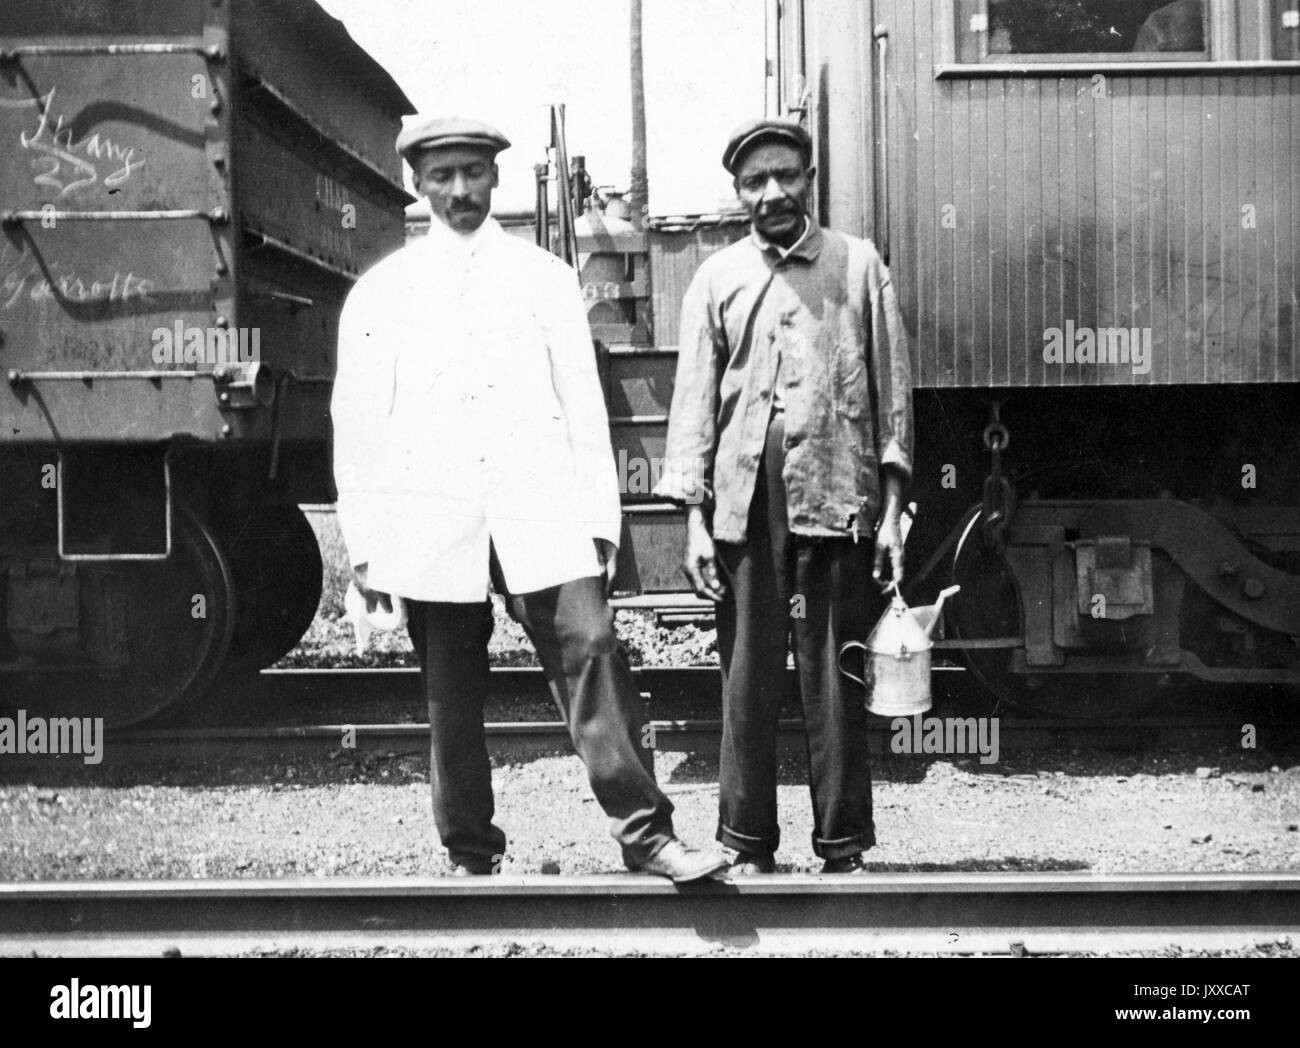 Full length portrait of two African American males dressed casually, one man holding a jug, neutral facial expressions, train behind them; Crew of rear end dynamometer car, 1920. Stock Photo